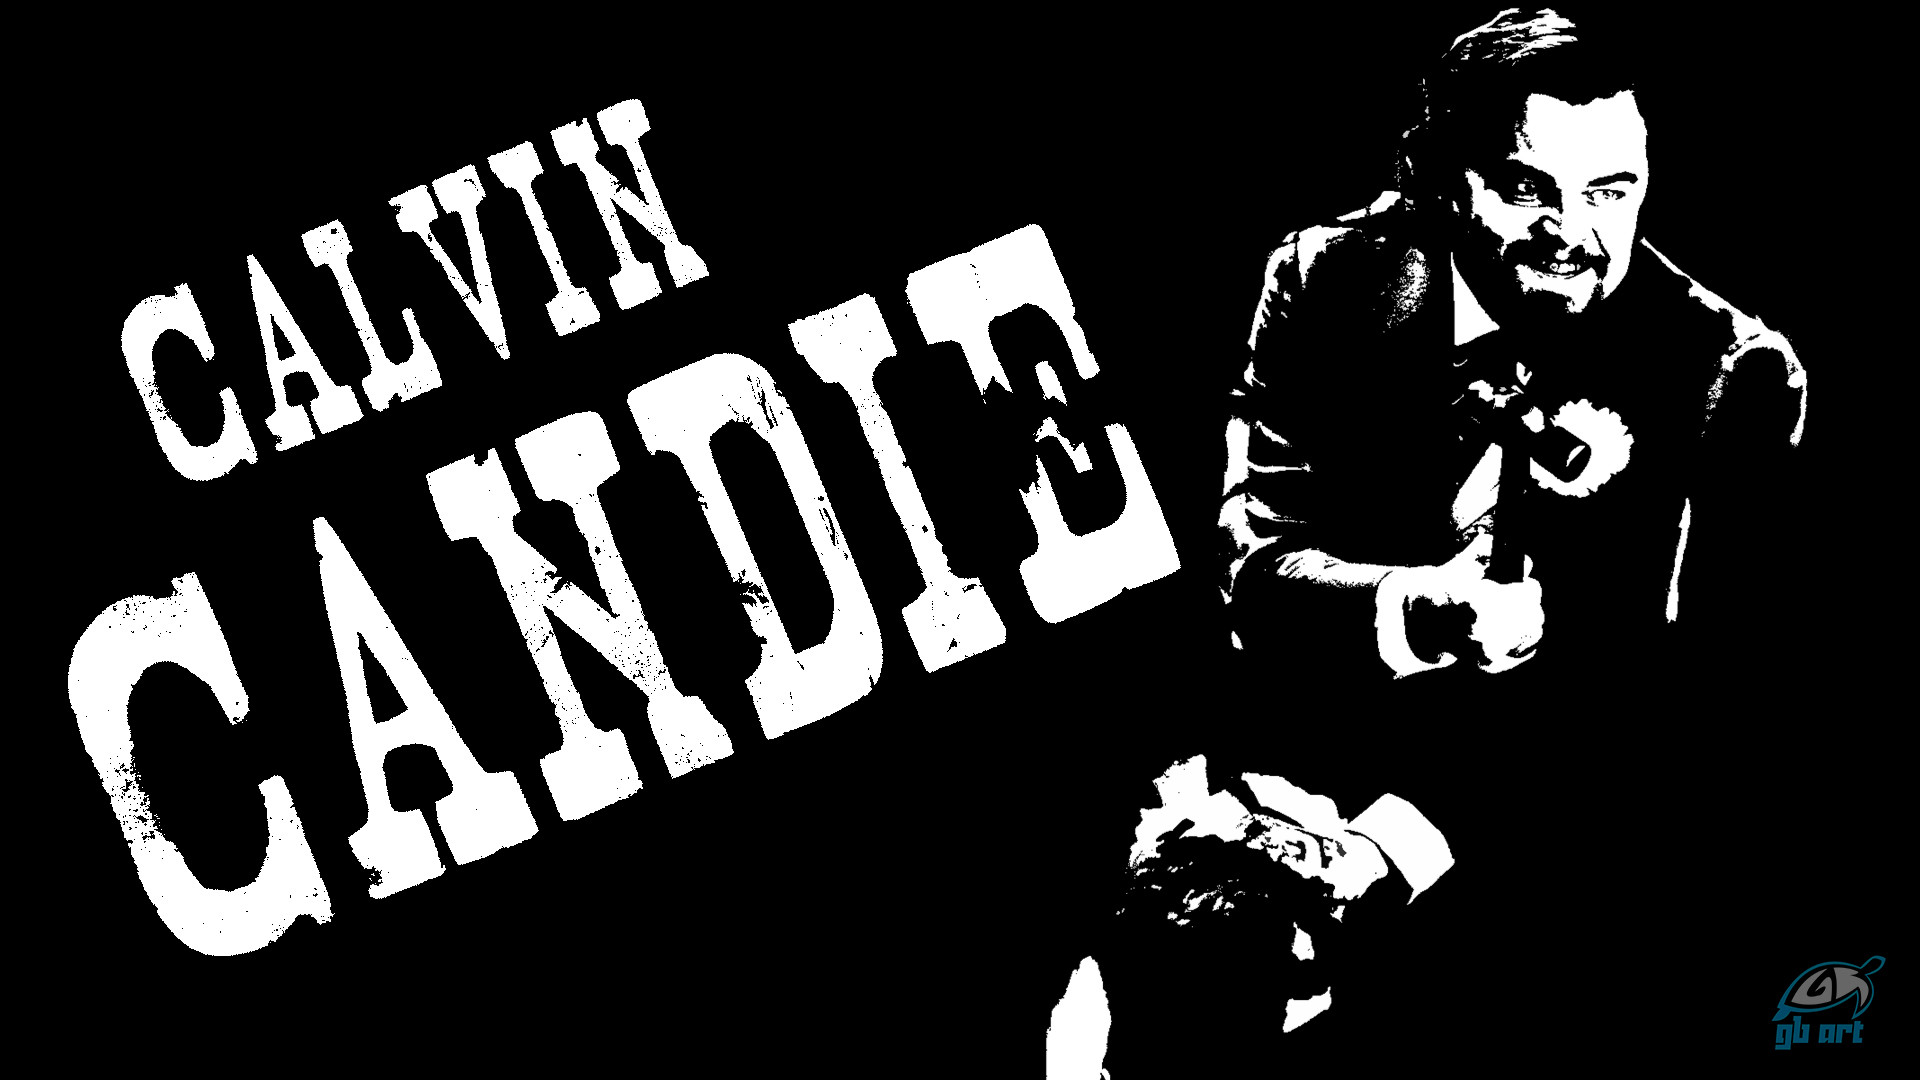 1920x1080 ... Mr. Candie (Django Unchained) by GB-ART3